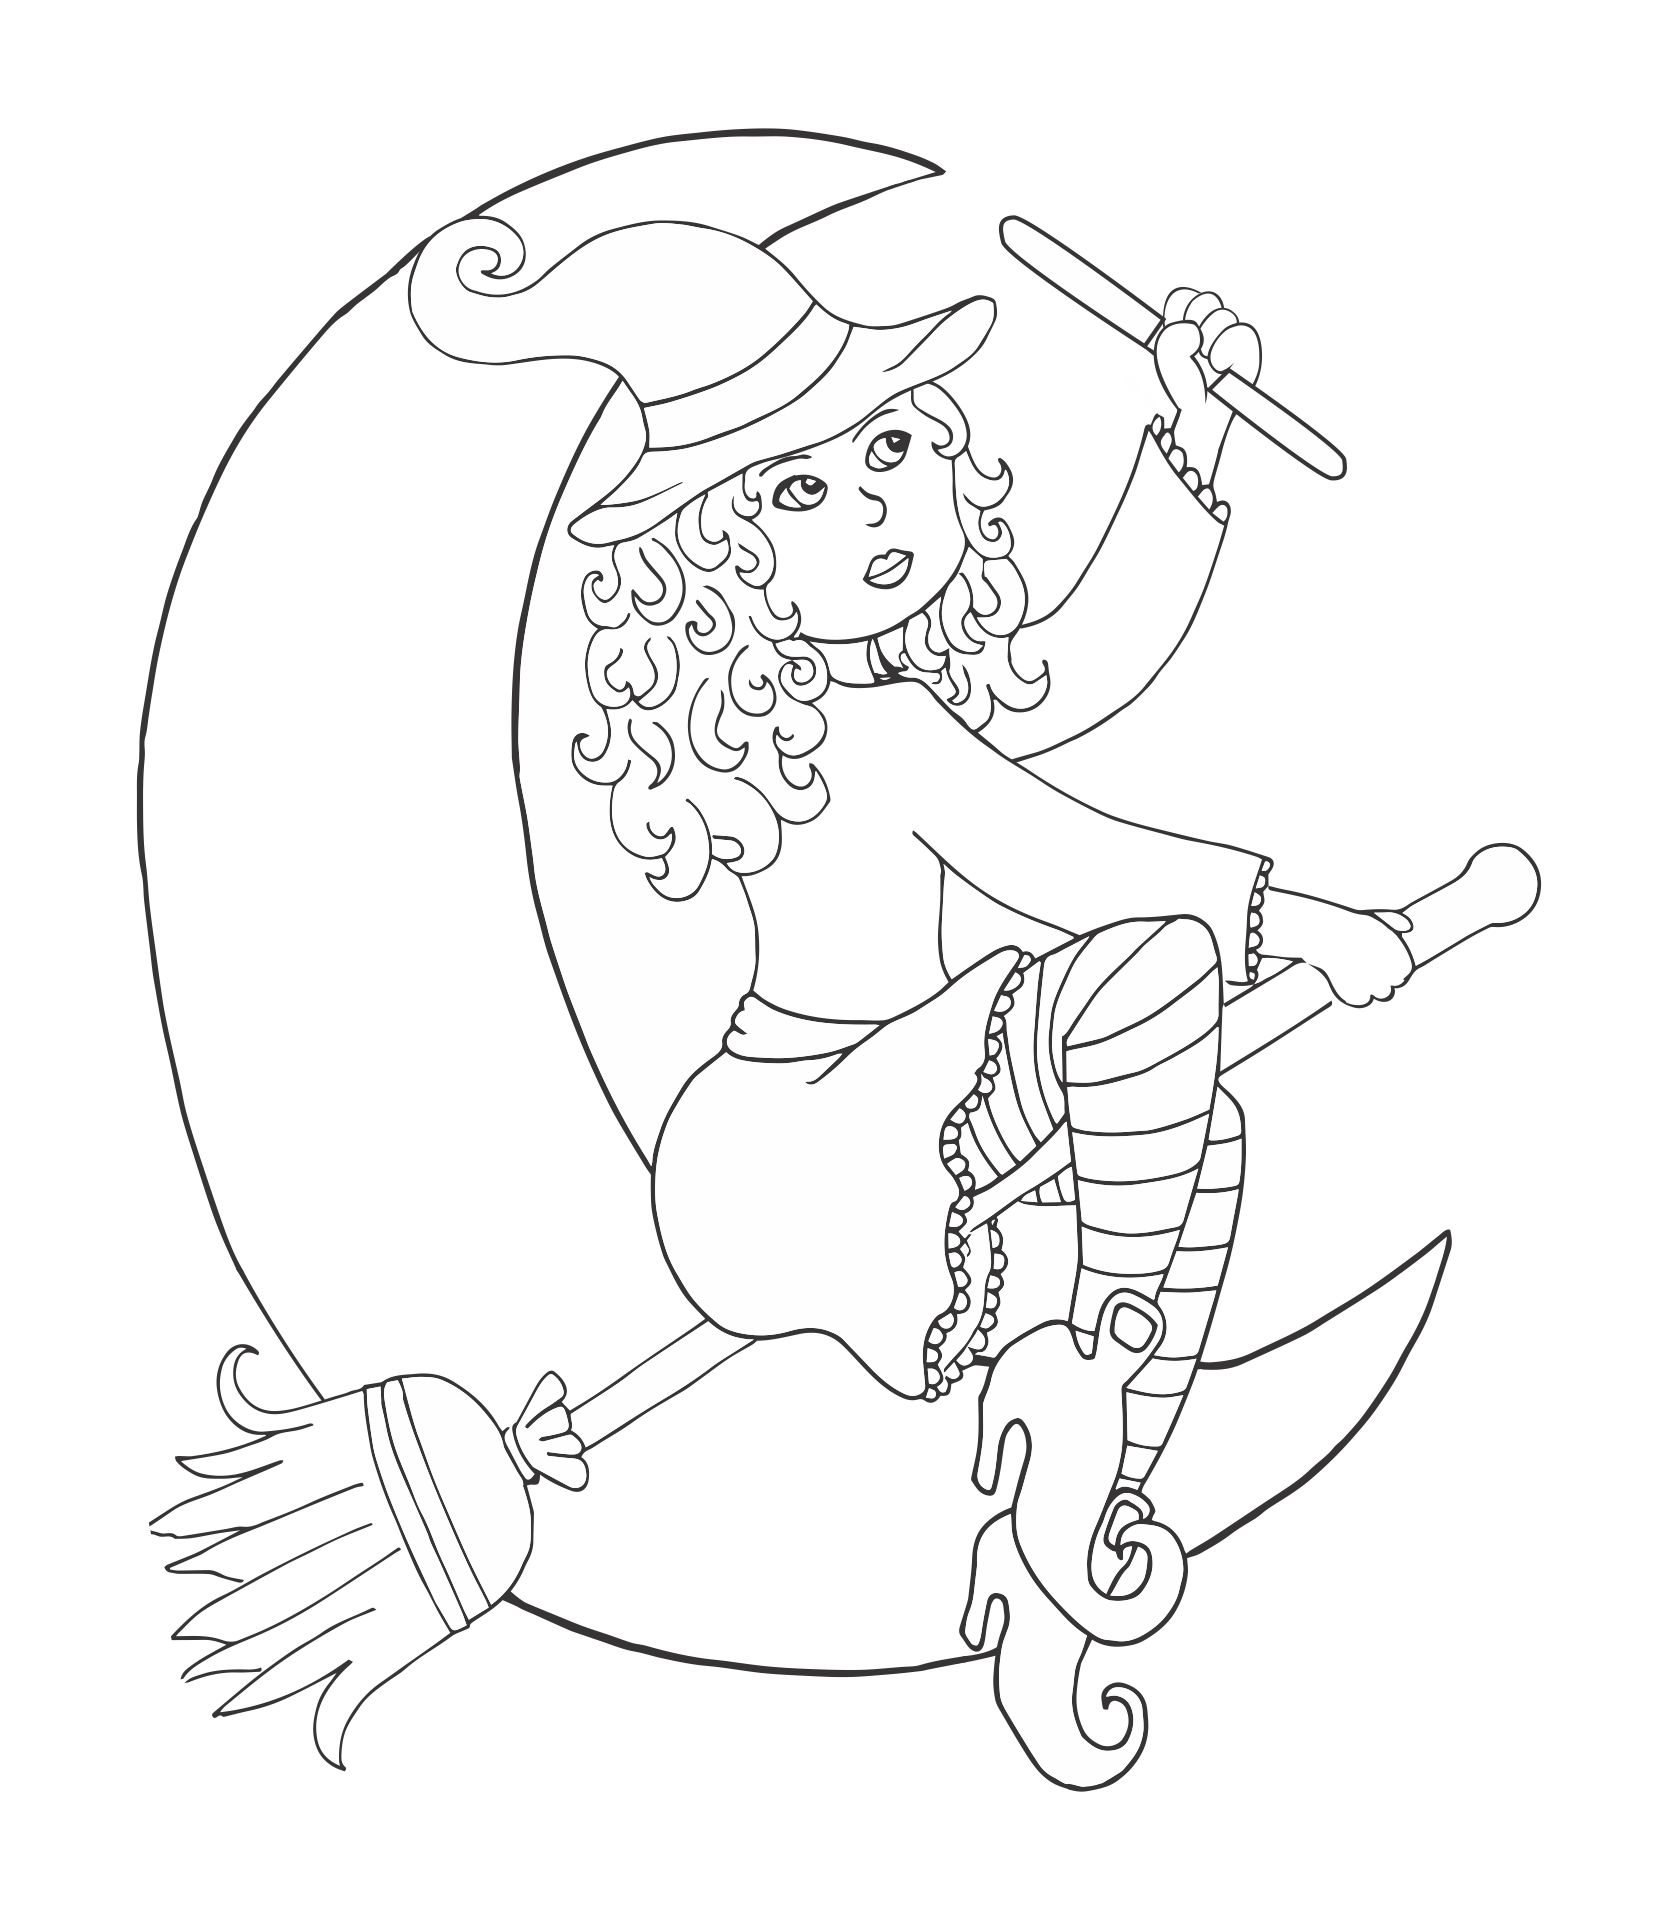 Printable Halloween Coloring Pages